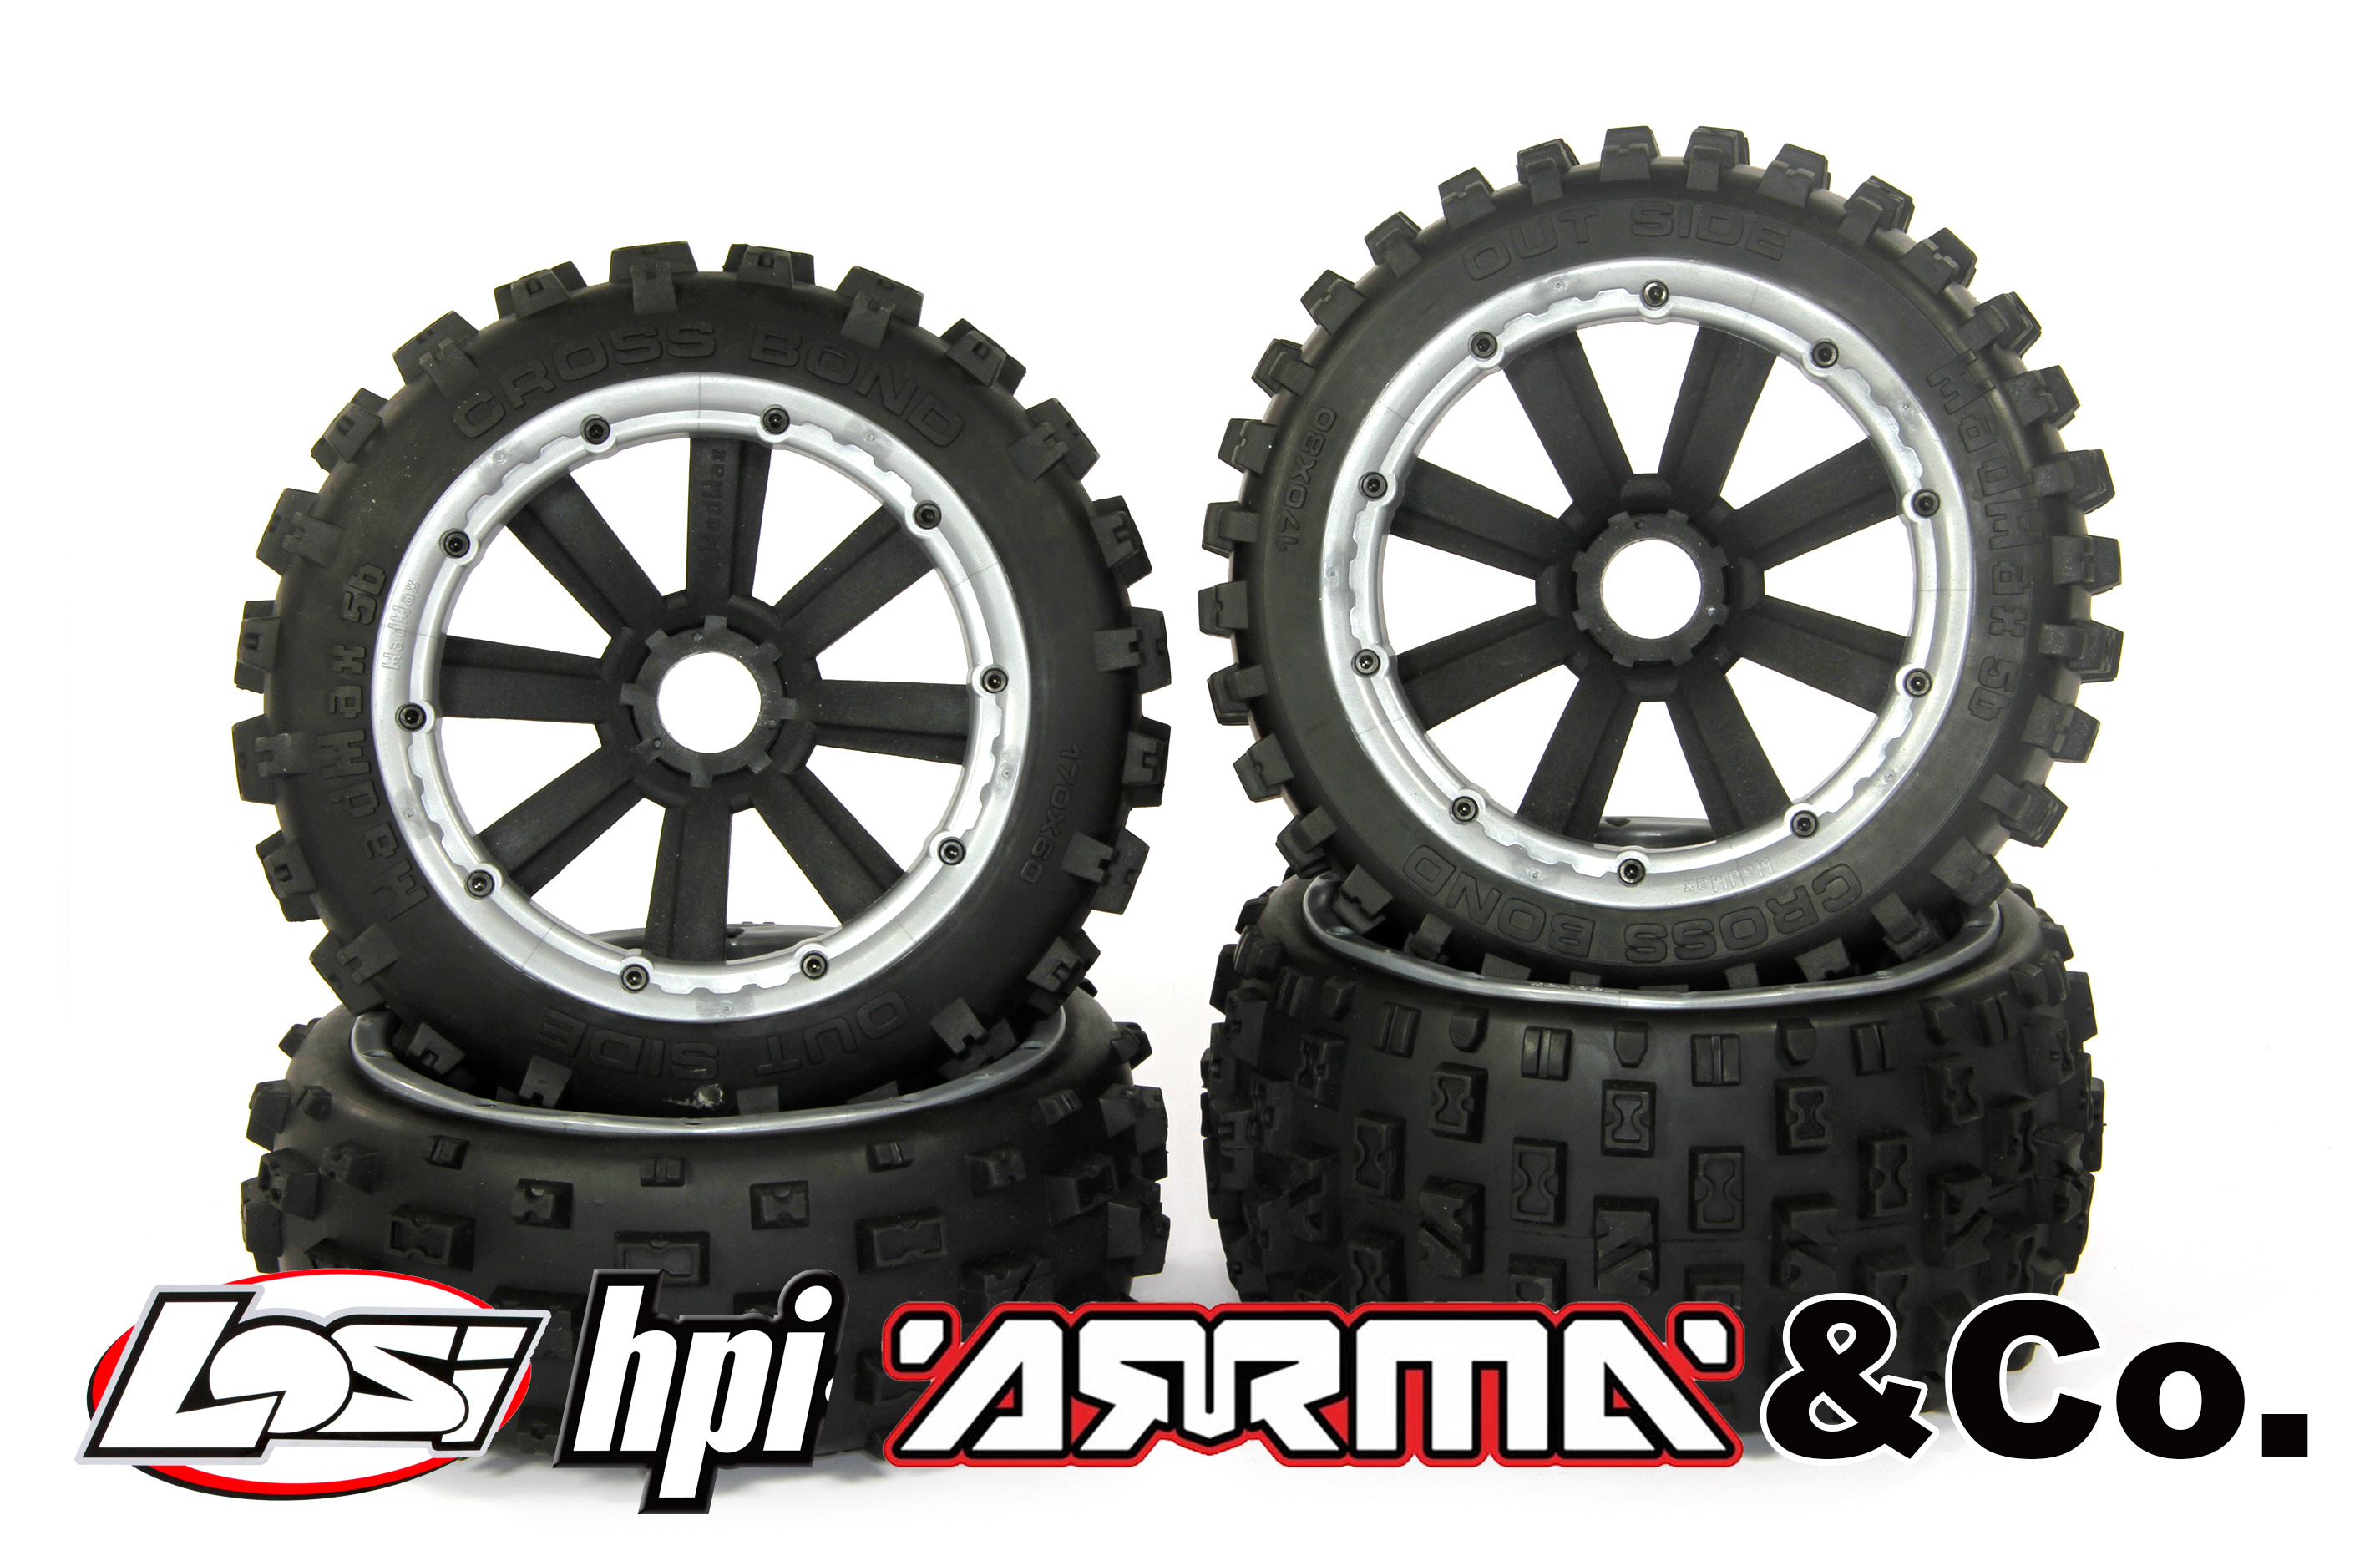 y1407/01 MadMax CROSS BOND 170x80/x60 tires for HPI + Losi (24 mm hex drive) Offer